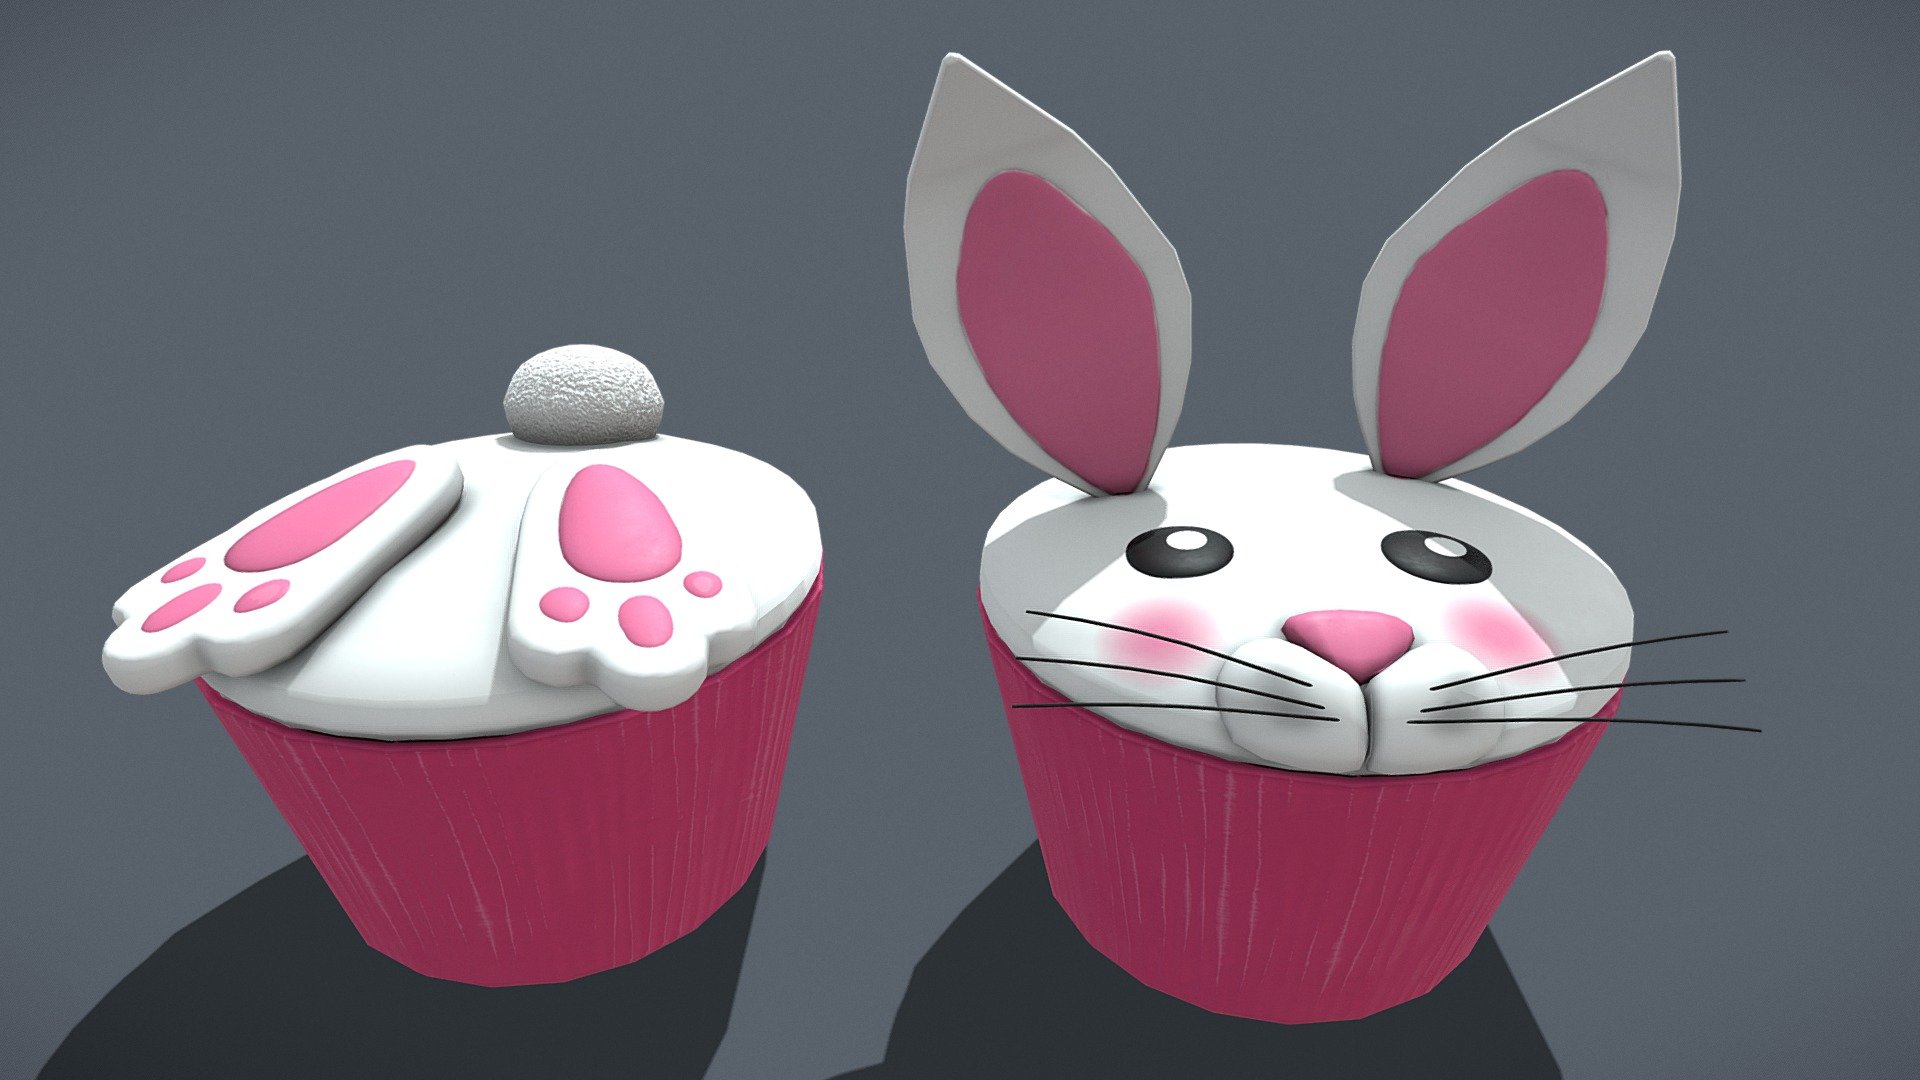 Easter_Bunny_Top and Bottom_Cupcakes
VR / AR / Low-poly
PBR approved
Geometry Polygon mesh
Polygons 2,968
Vertices 3,055
Textures PNG 4K - Easter Bunny Top and Bottom Cupcakes - 3D model by GetDeadEntertainment 3d model